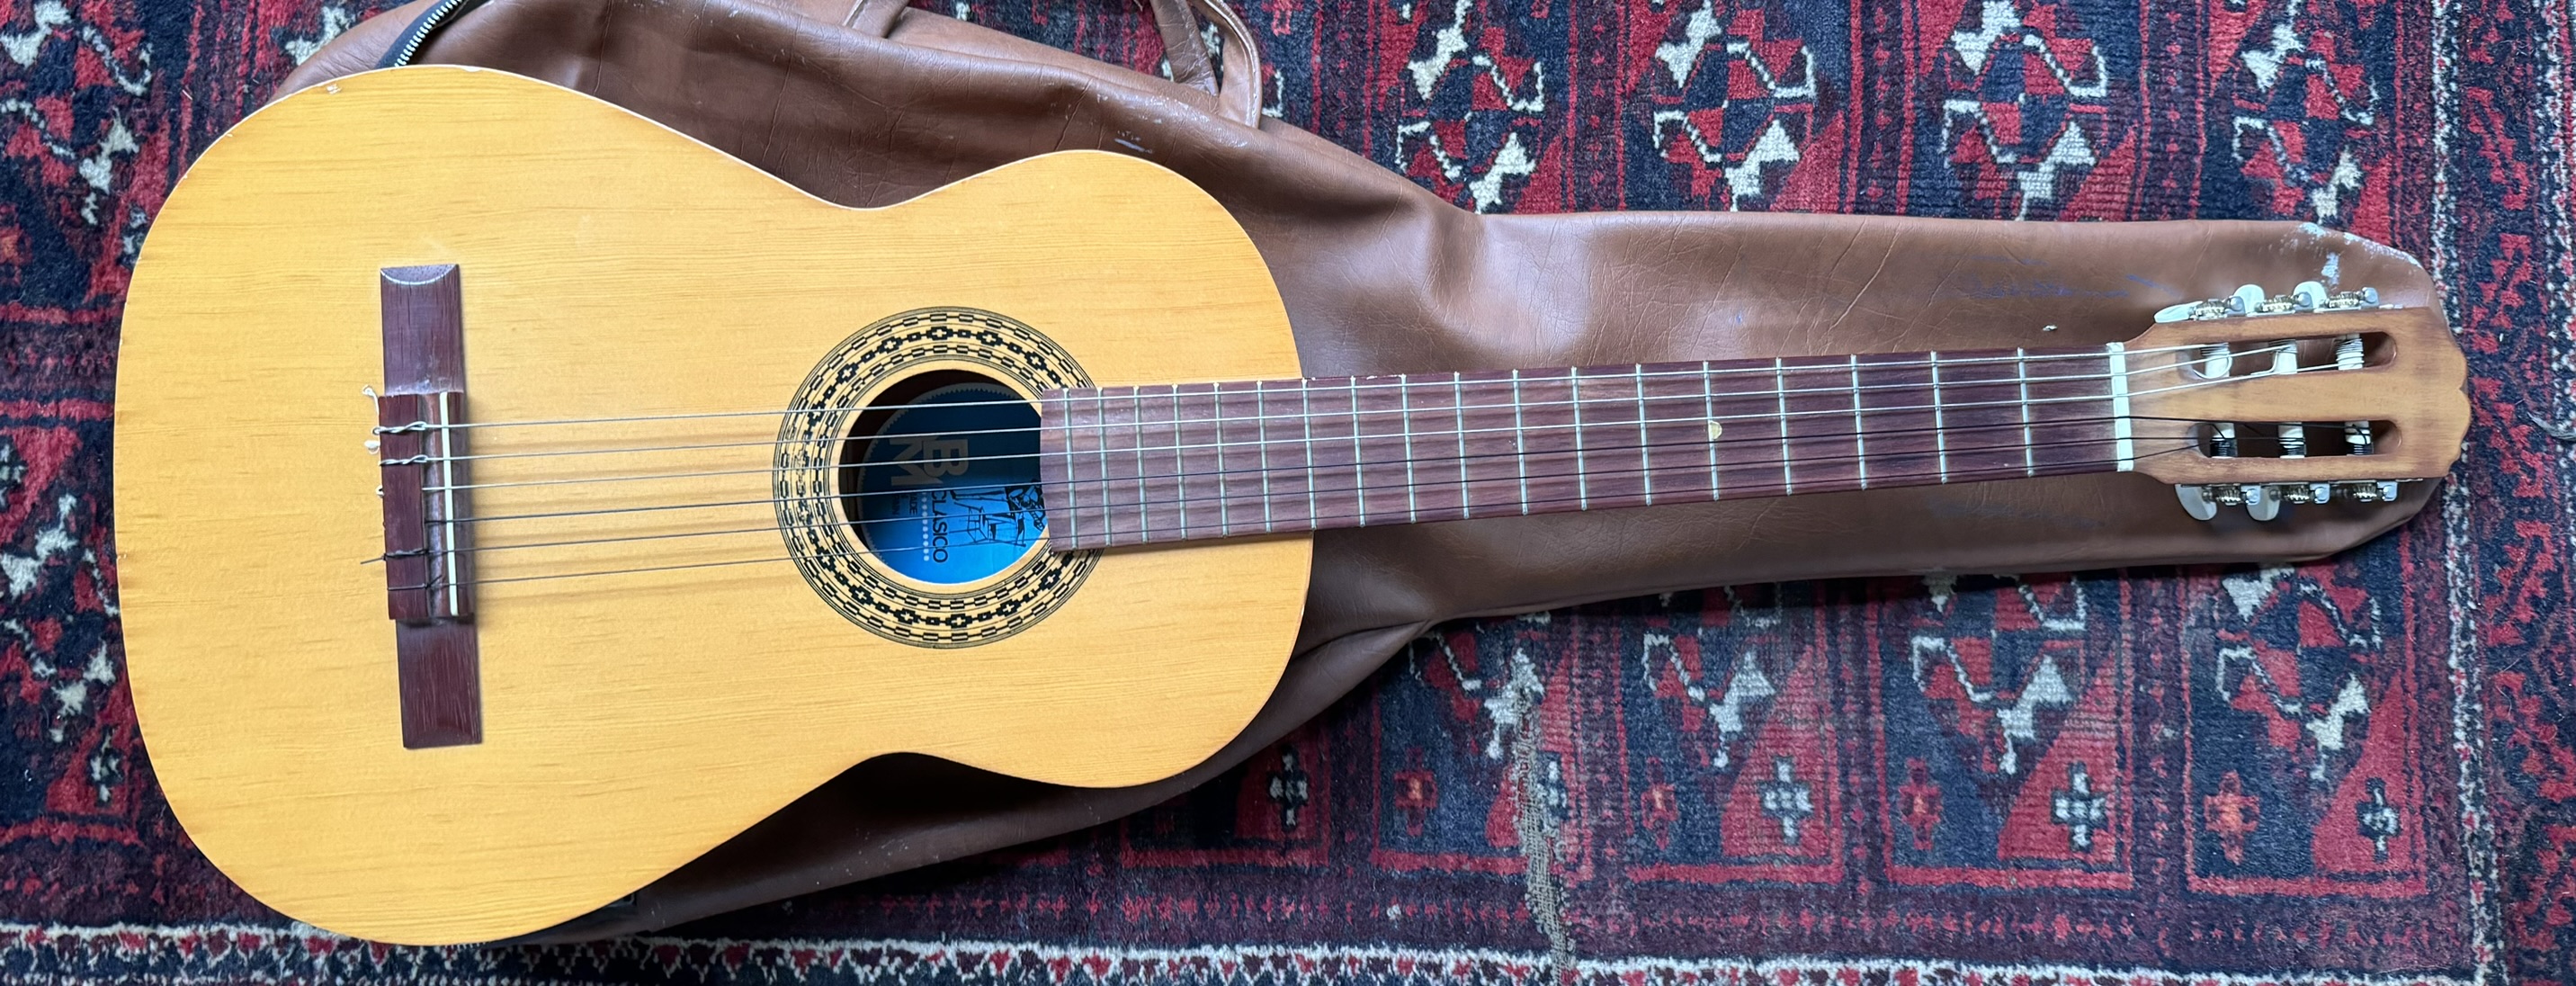 A BM Classico Spanish acoustic guitar and case